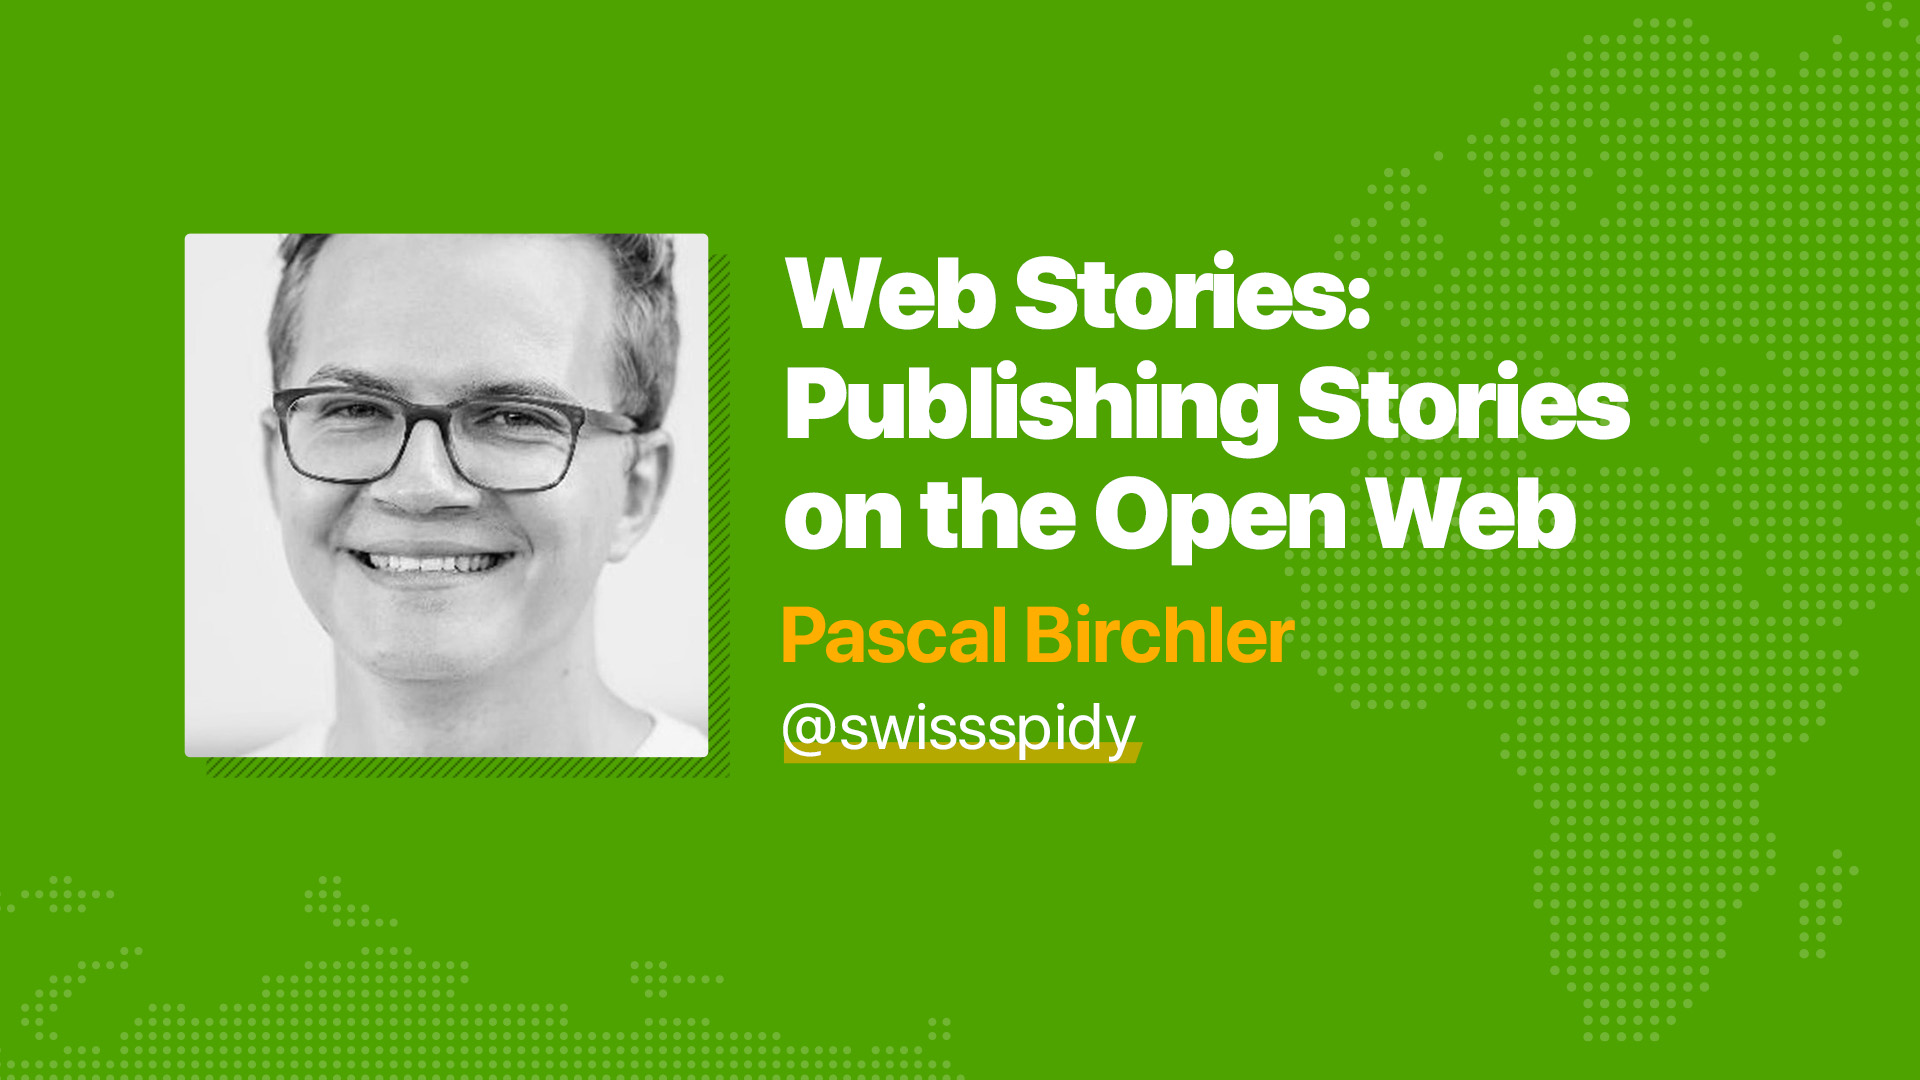 Web Stories: Publishing Stories on the Open Web